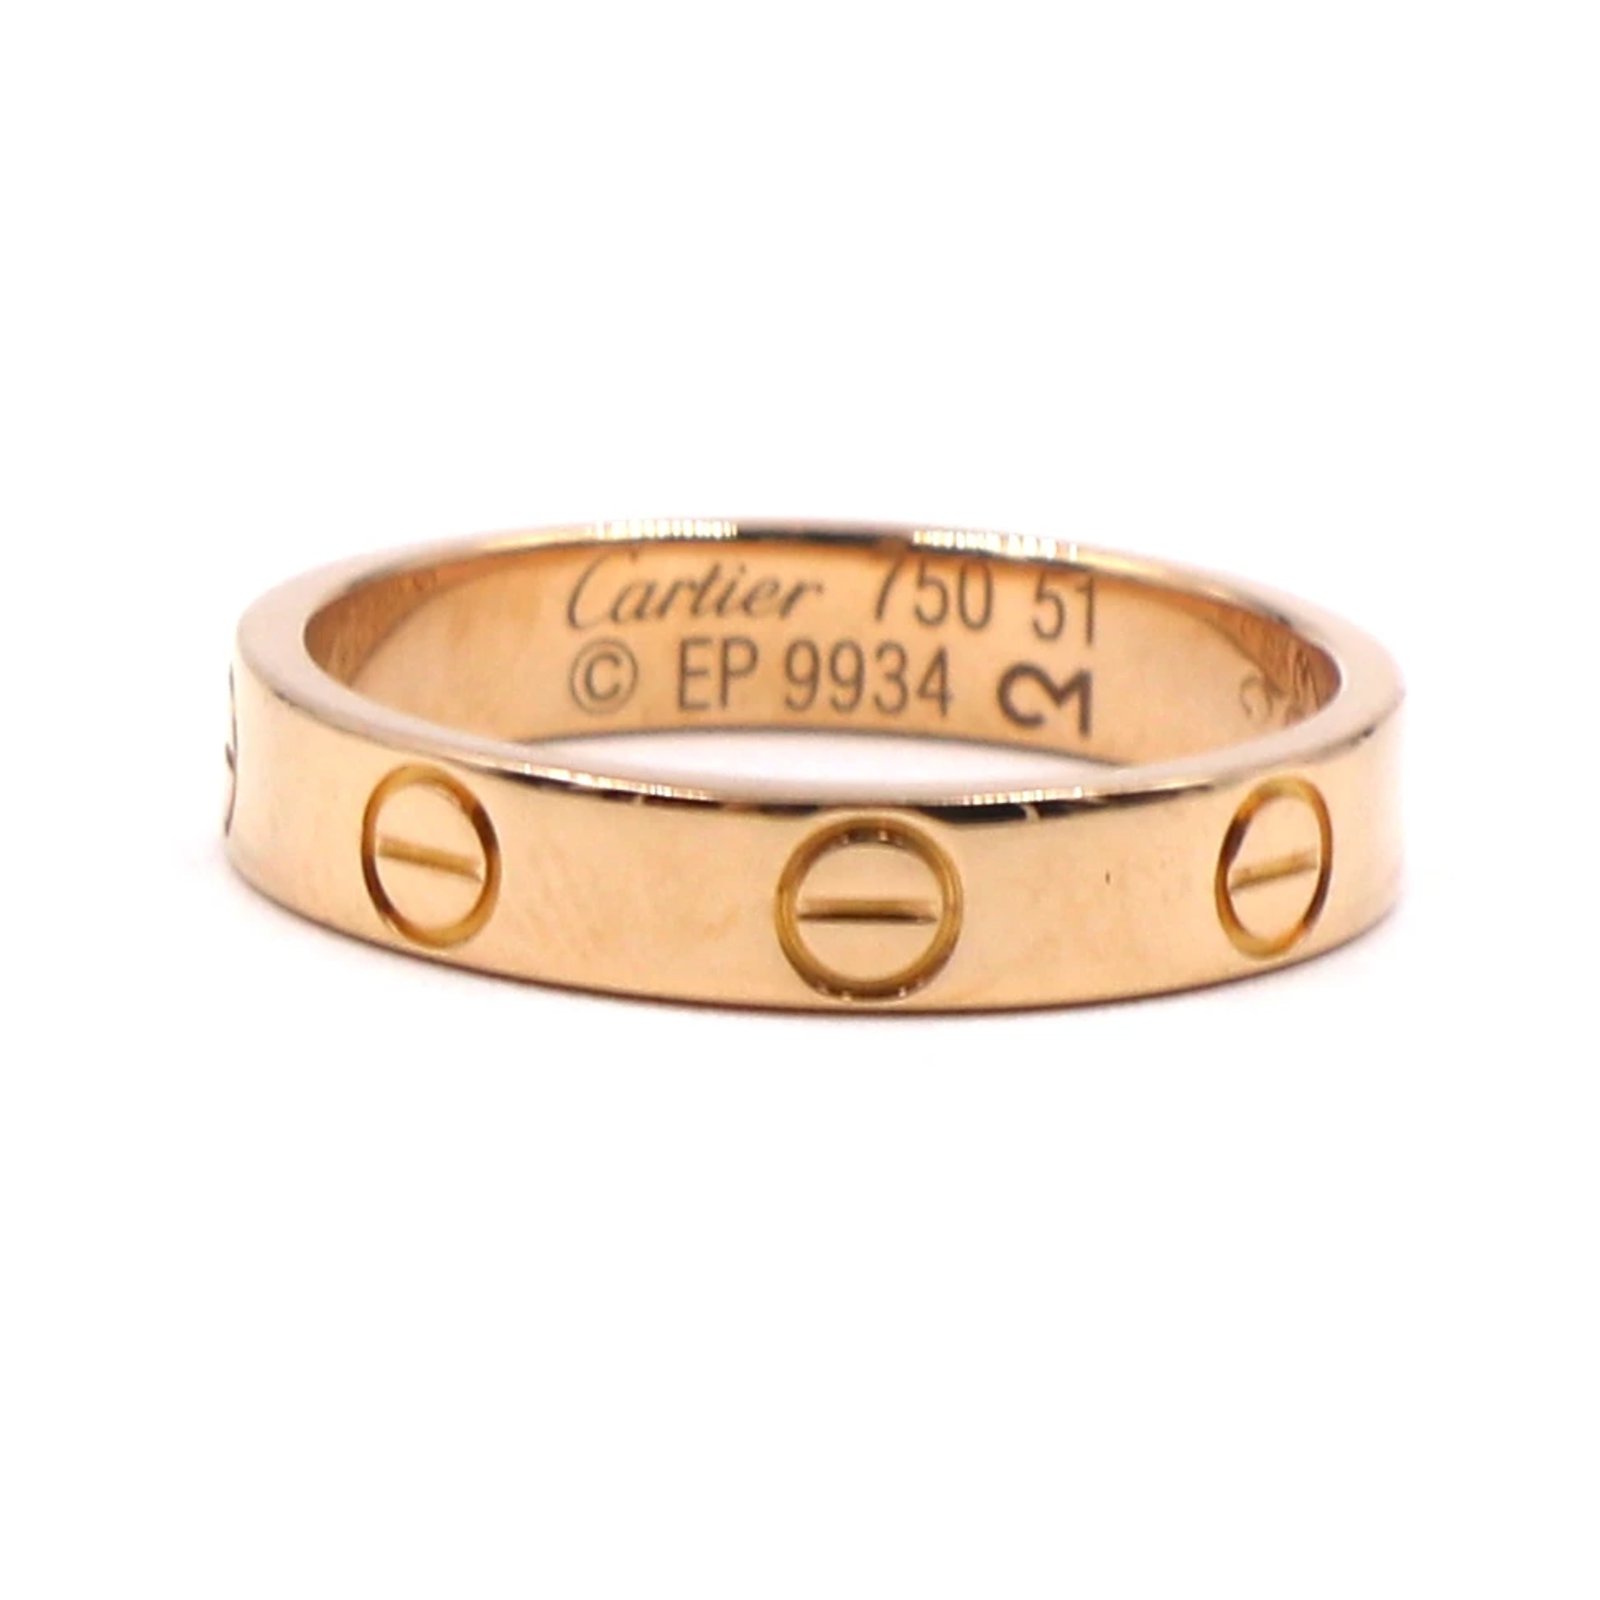 cartier rose gold ring